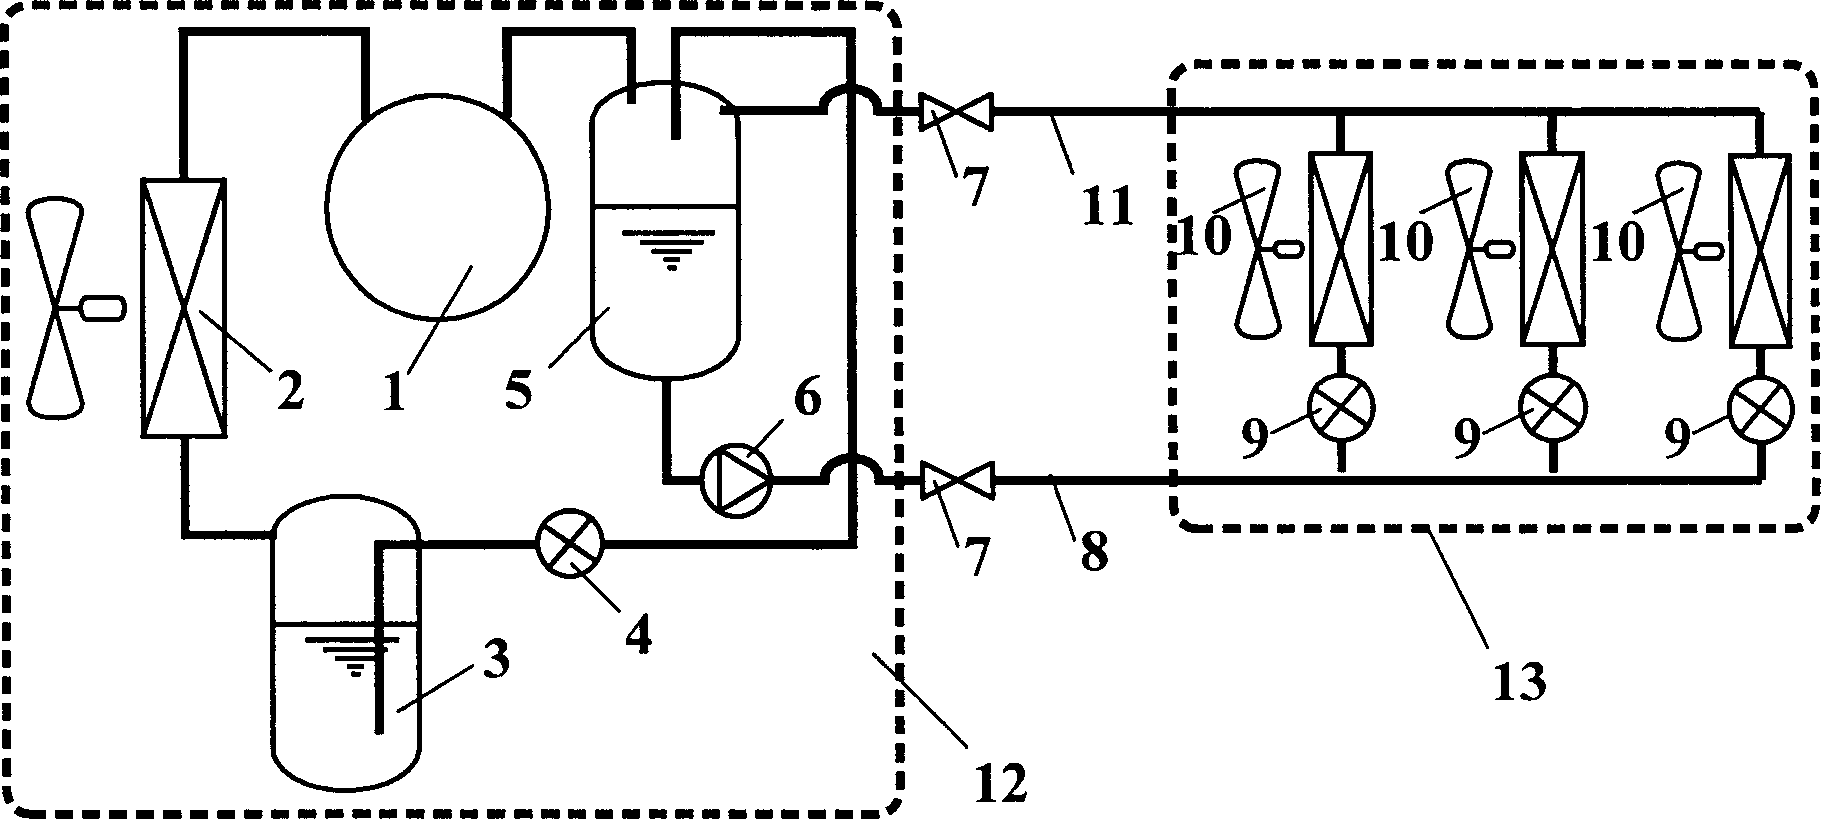 Multi-connected air conditioning unit with liquid pump to supply refrigerant